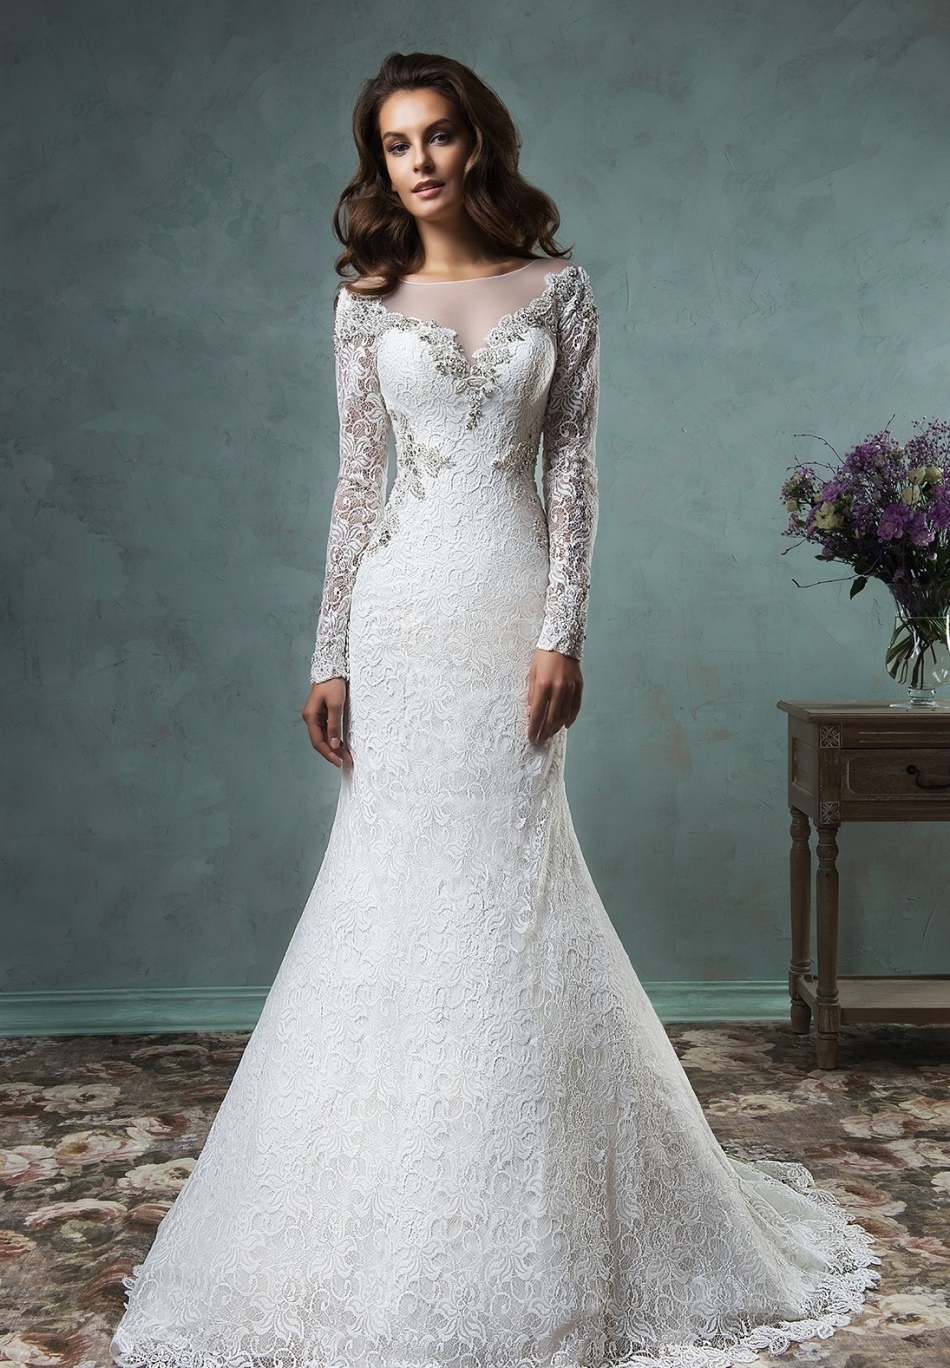 Lace dress for the bride